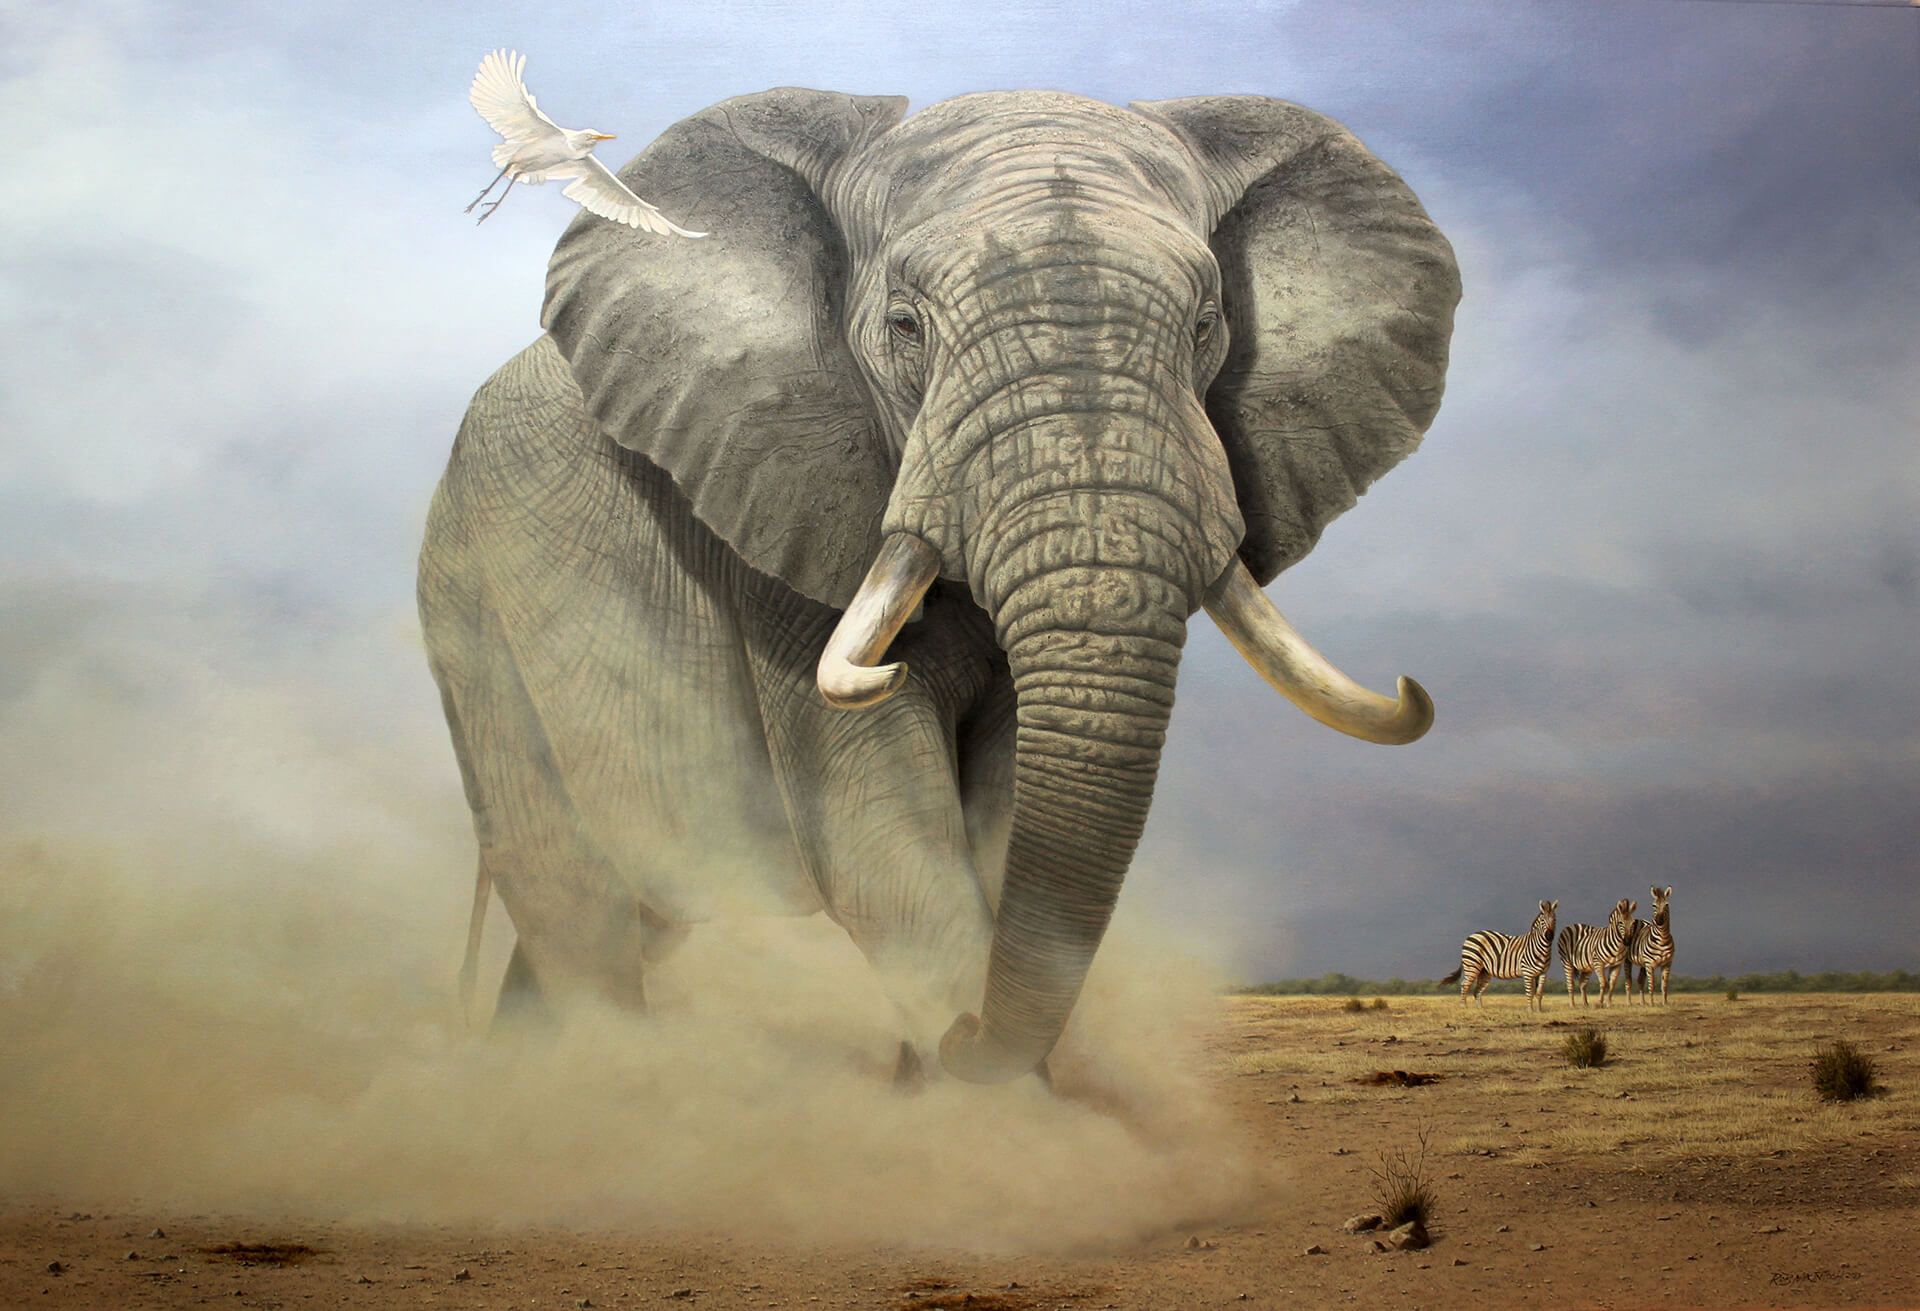 Photorealistic painting of an elephant charging through dust